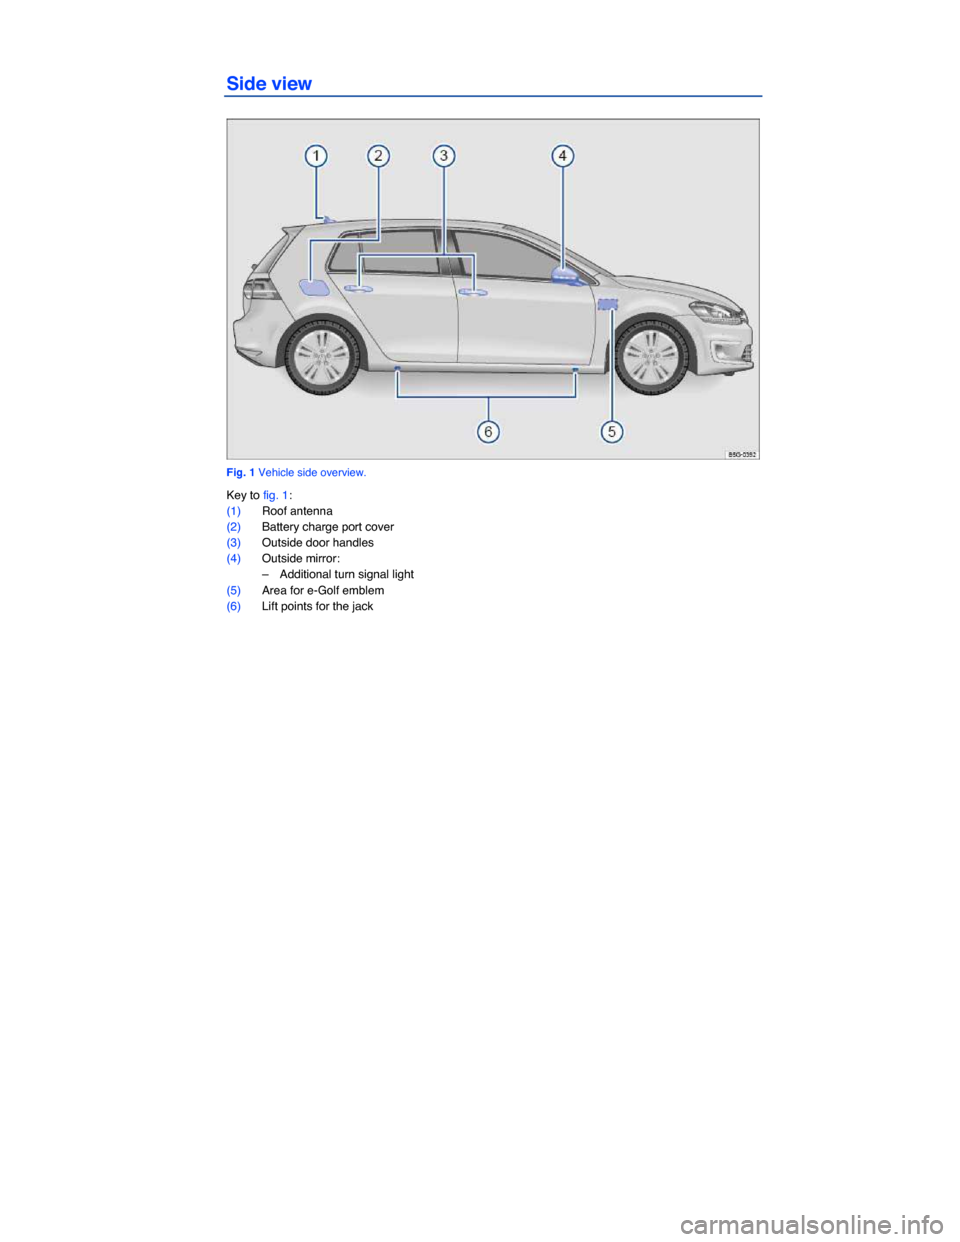 VOLKSWAGEN E GOLF 2015 5G / 7.G Owners Manual  
Side view 
 
Fig. 1 Vehicle side overview. 
Key to fig. 1: 
(1) Roof antenna  
(2) Battery charge port cover  
(3) Outside door handles  
(4) Outside mirror:  
–  Additional turn signal light  
(5